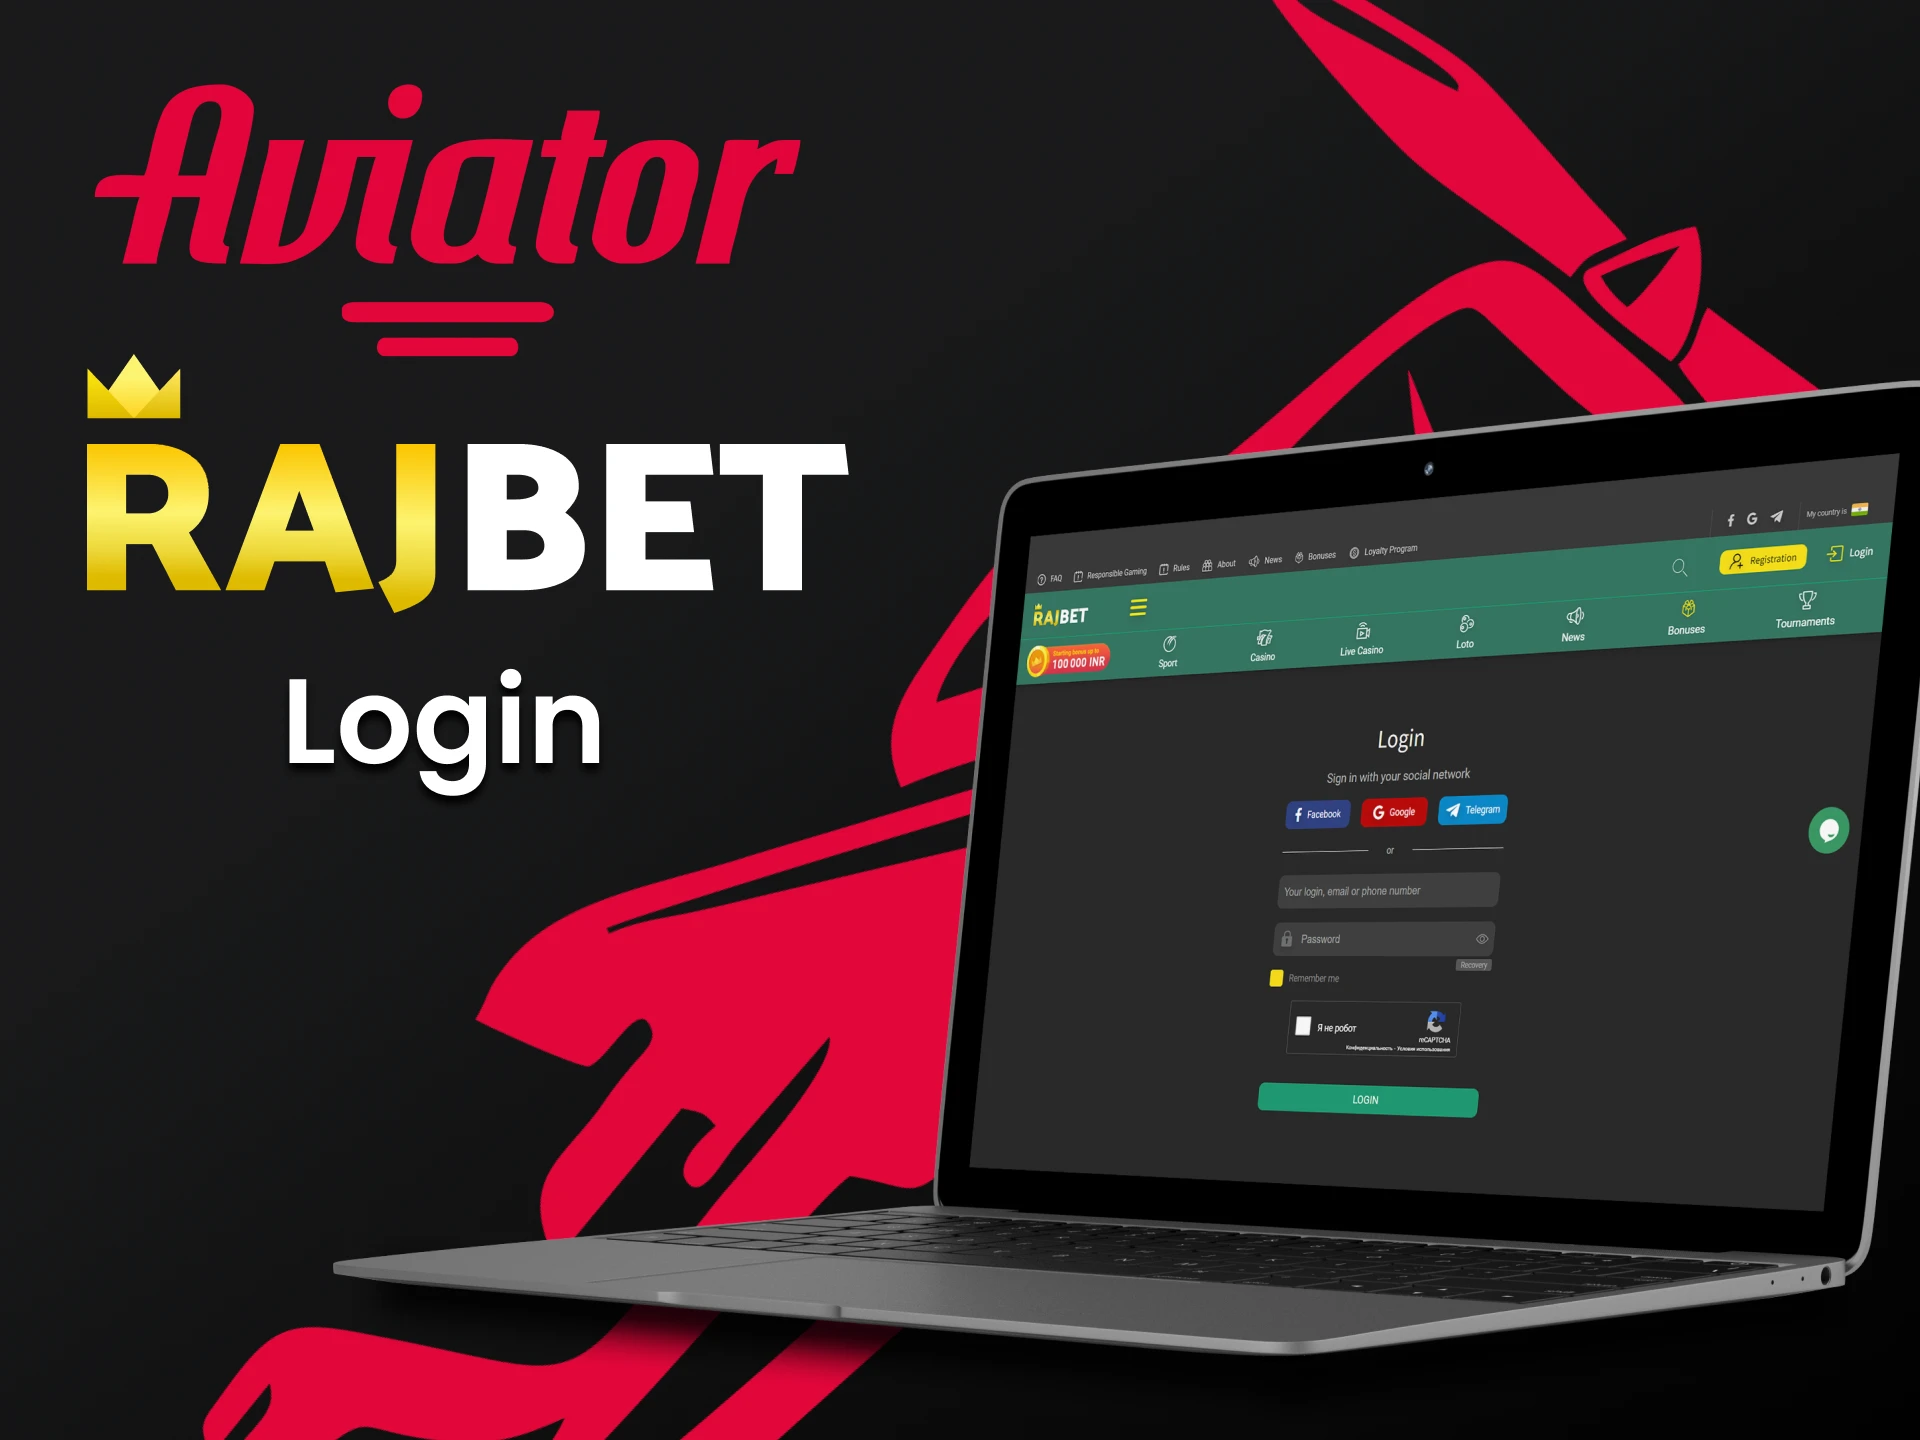 Log in to your personal Rajbet account to play Aviator.